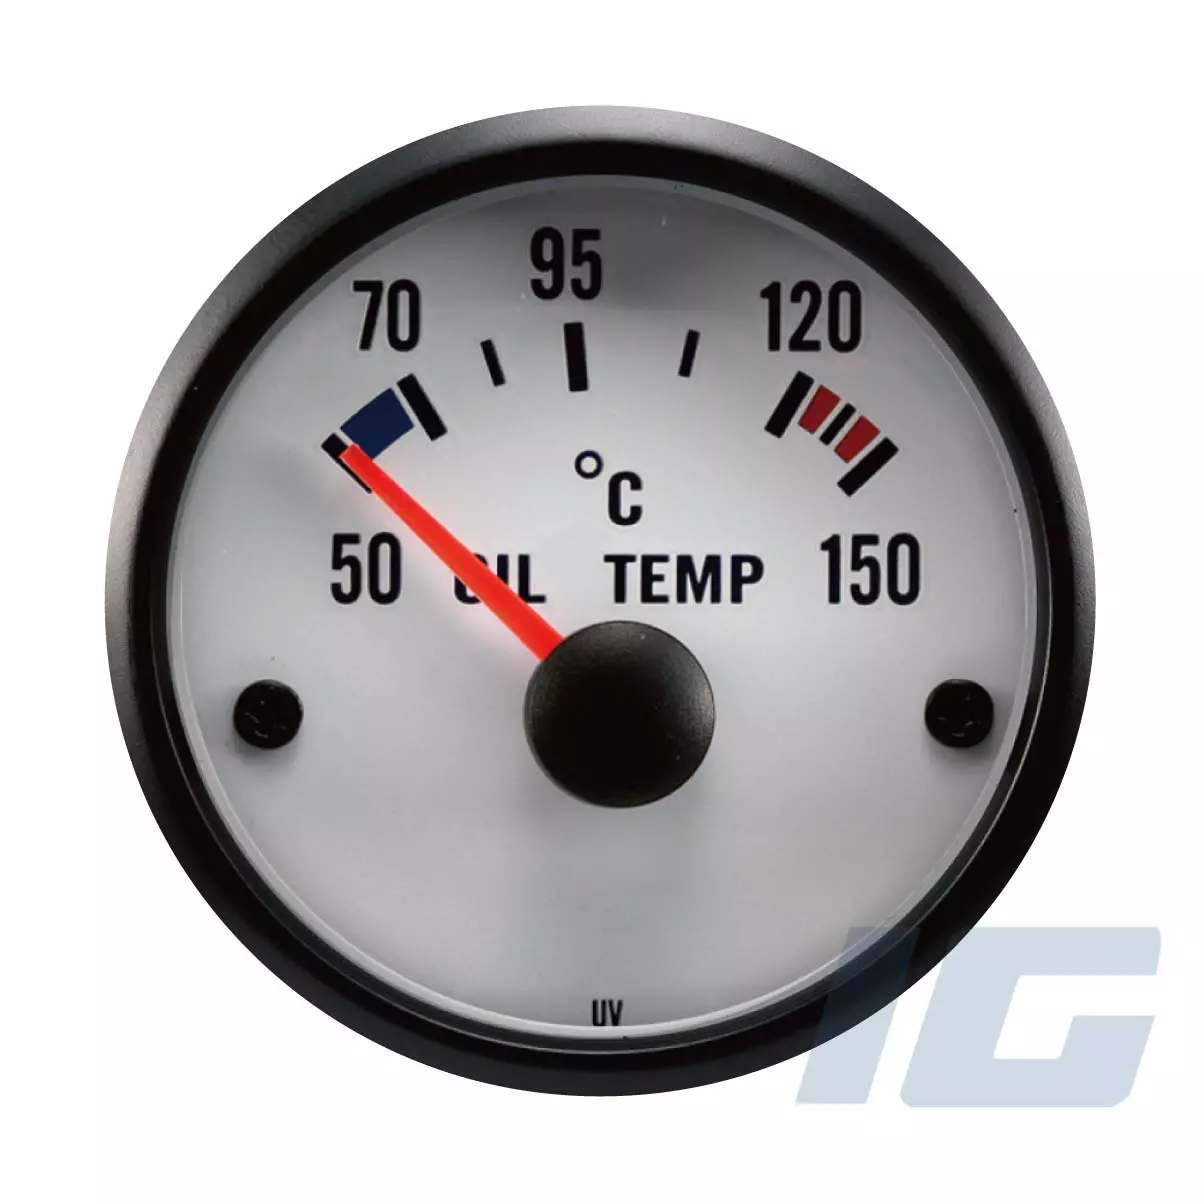 igauge, MGS Series, 52mm, White Face, Aftermarket, Marine, Gauge, Boat, Outboard, Oil Temperature